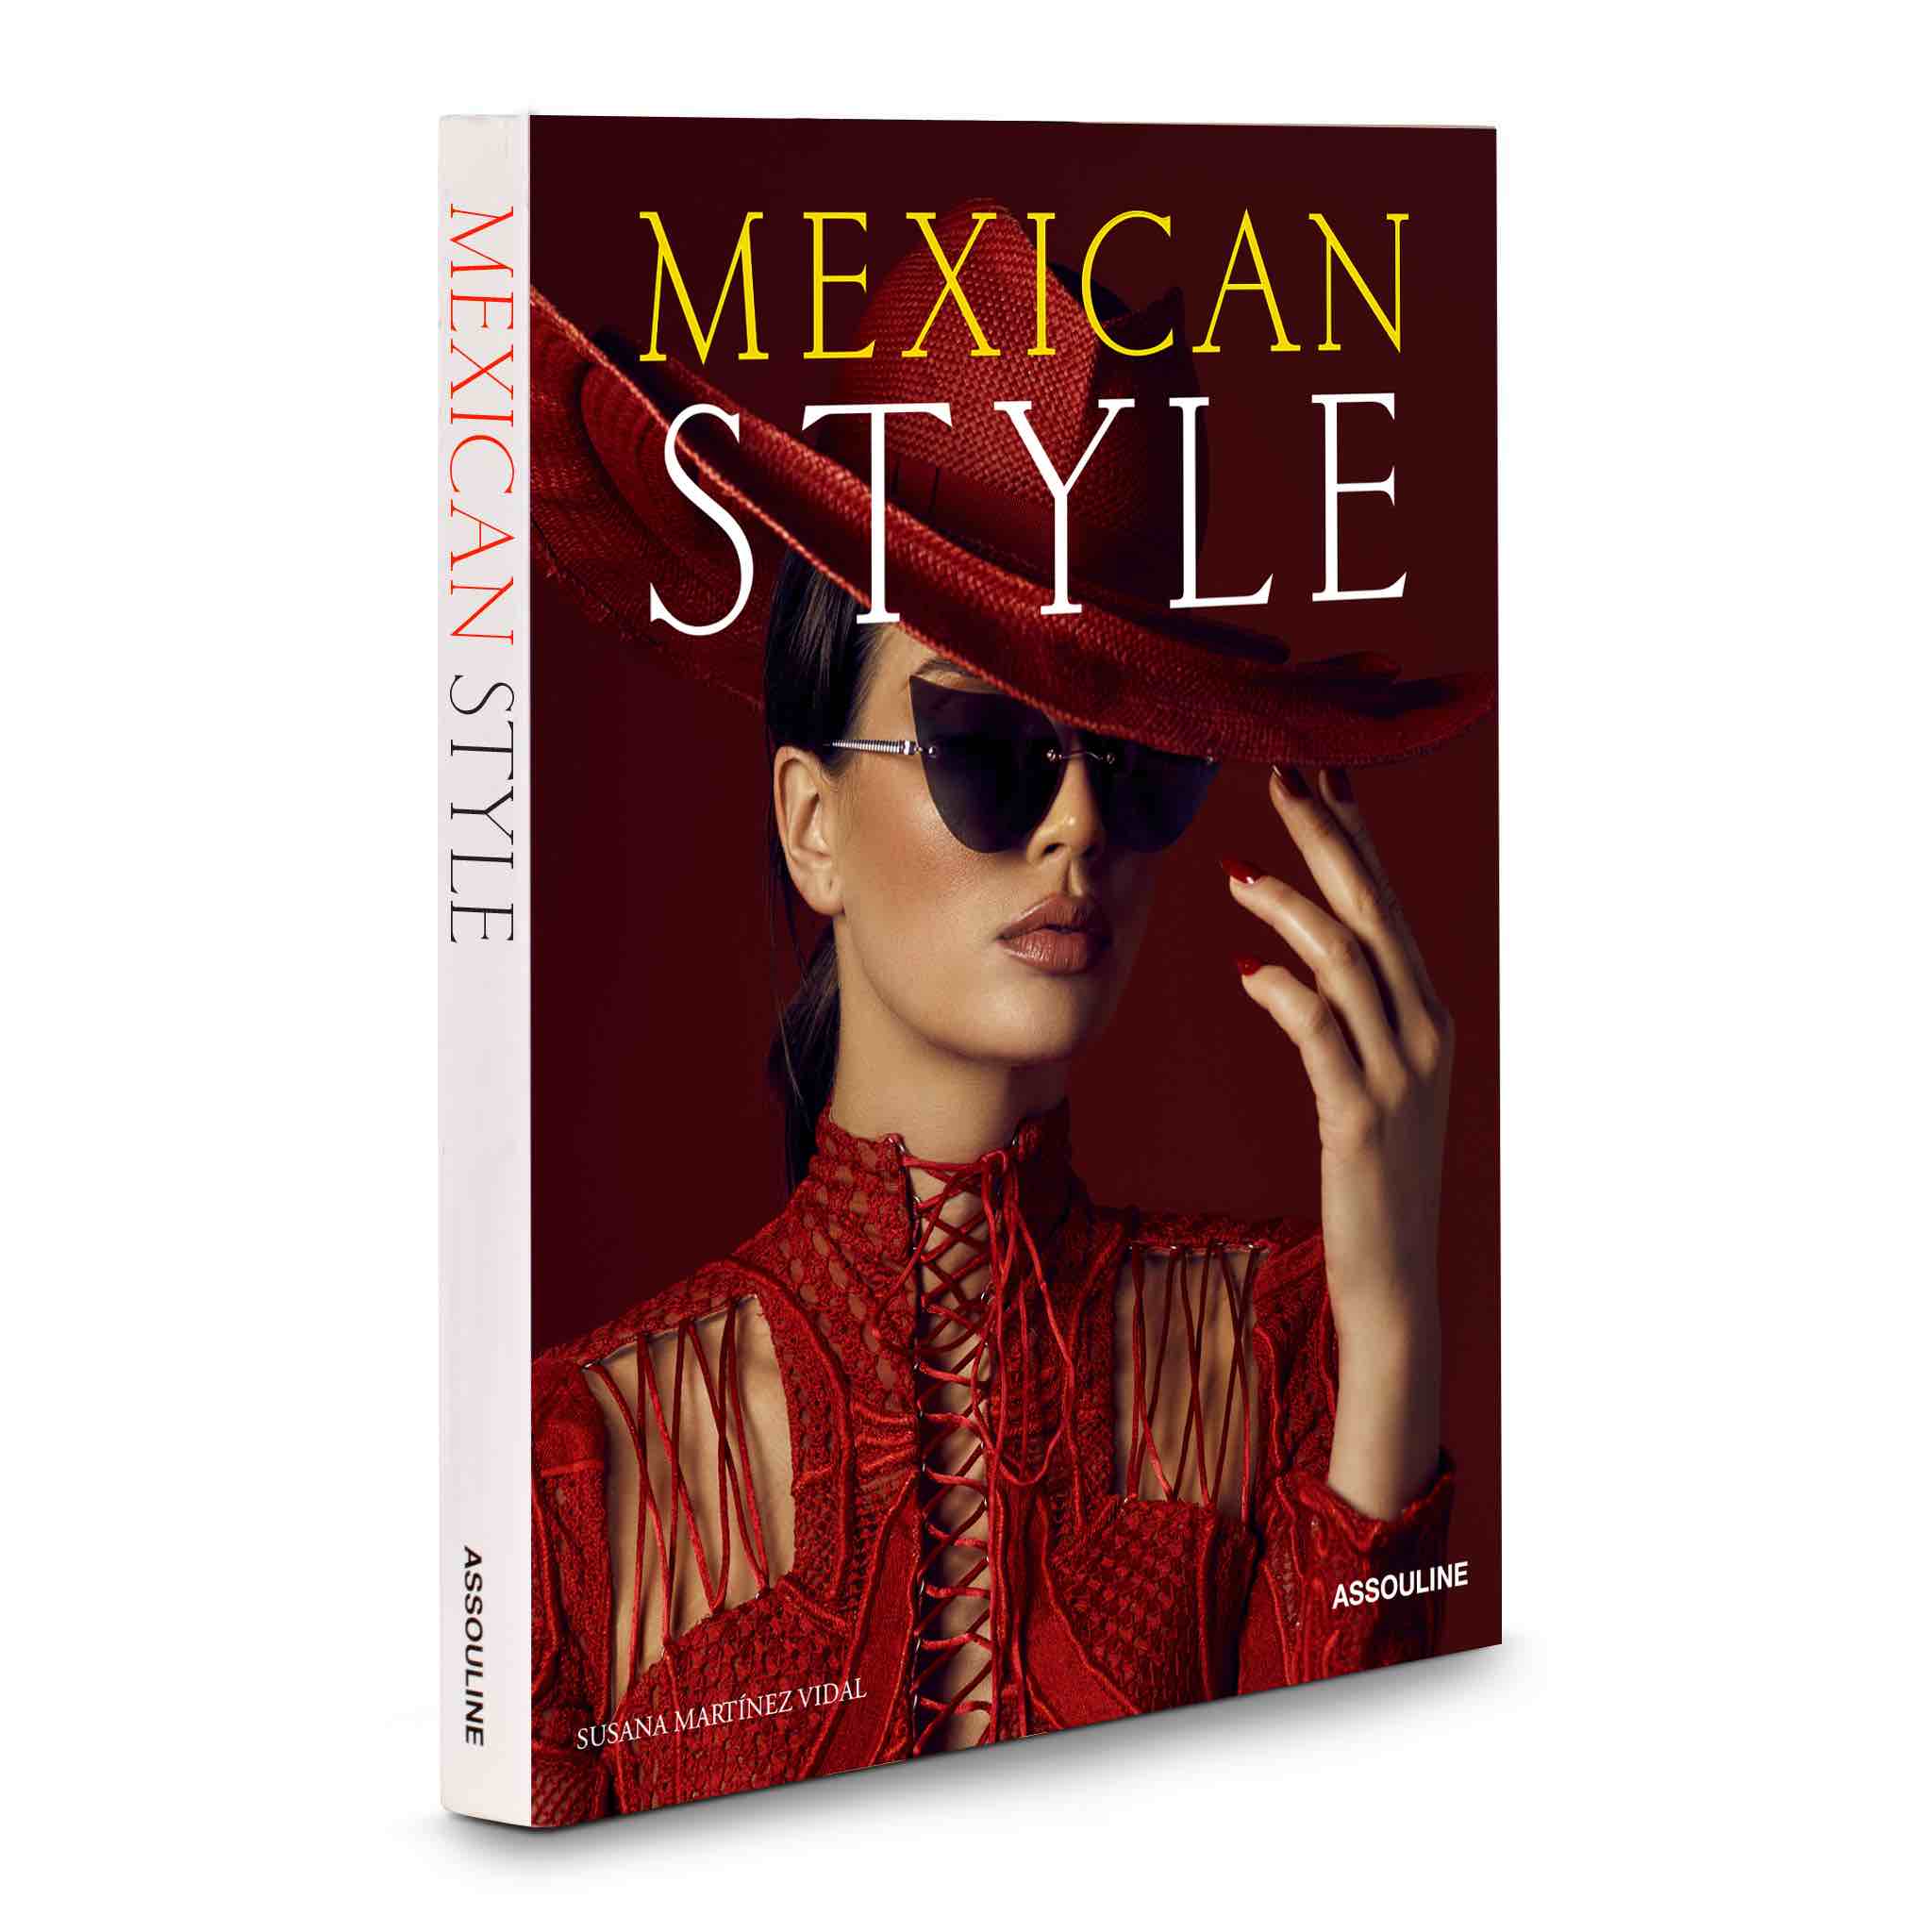 Mexican Style, Assouline